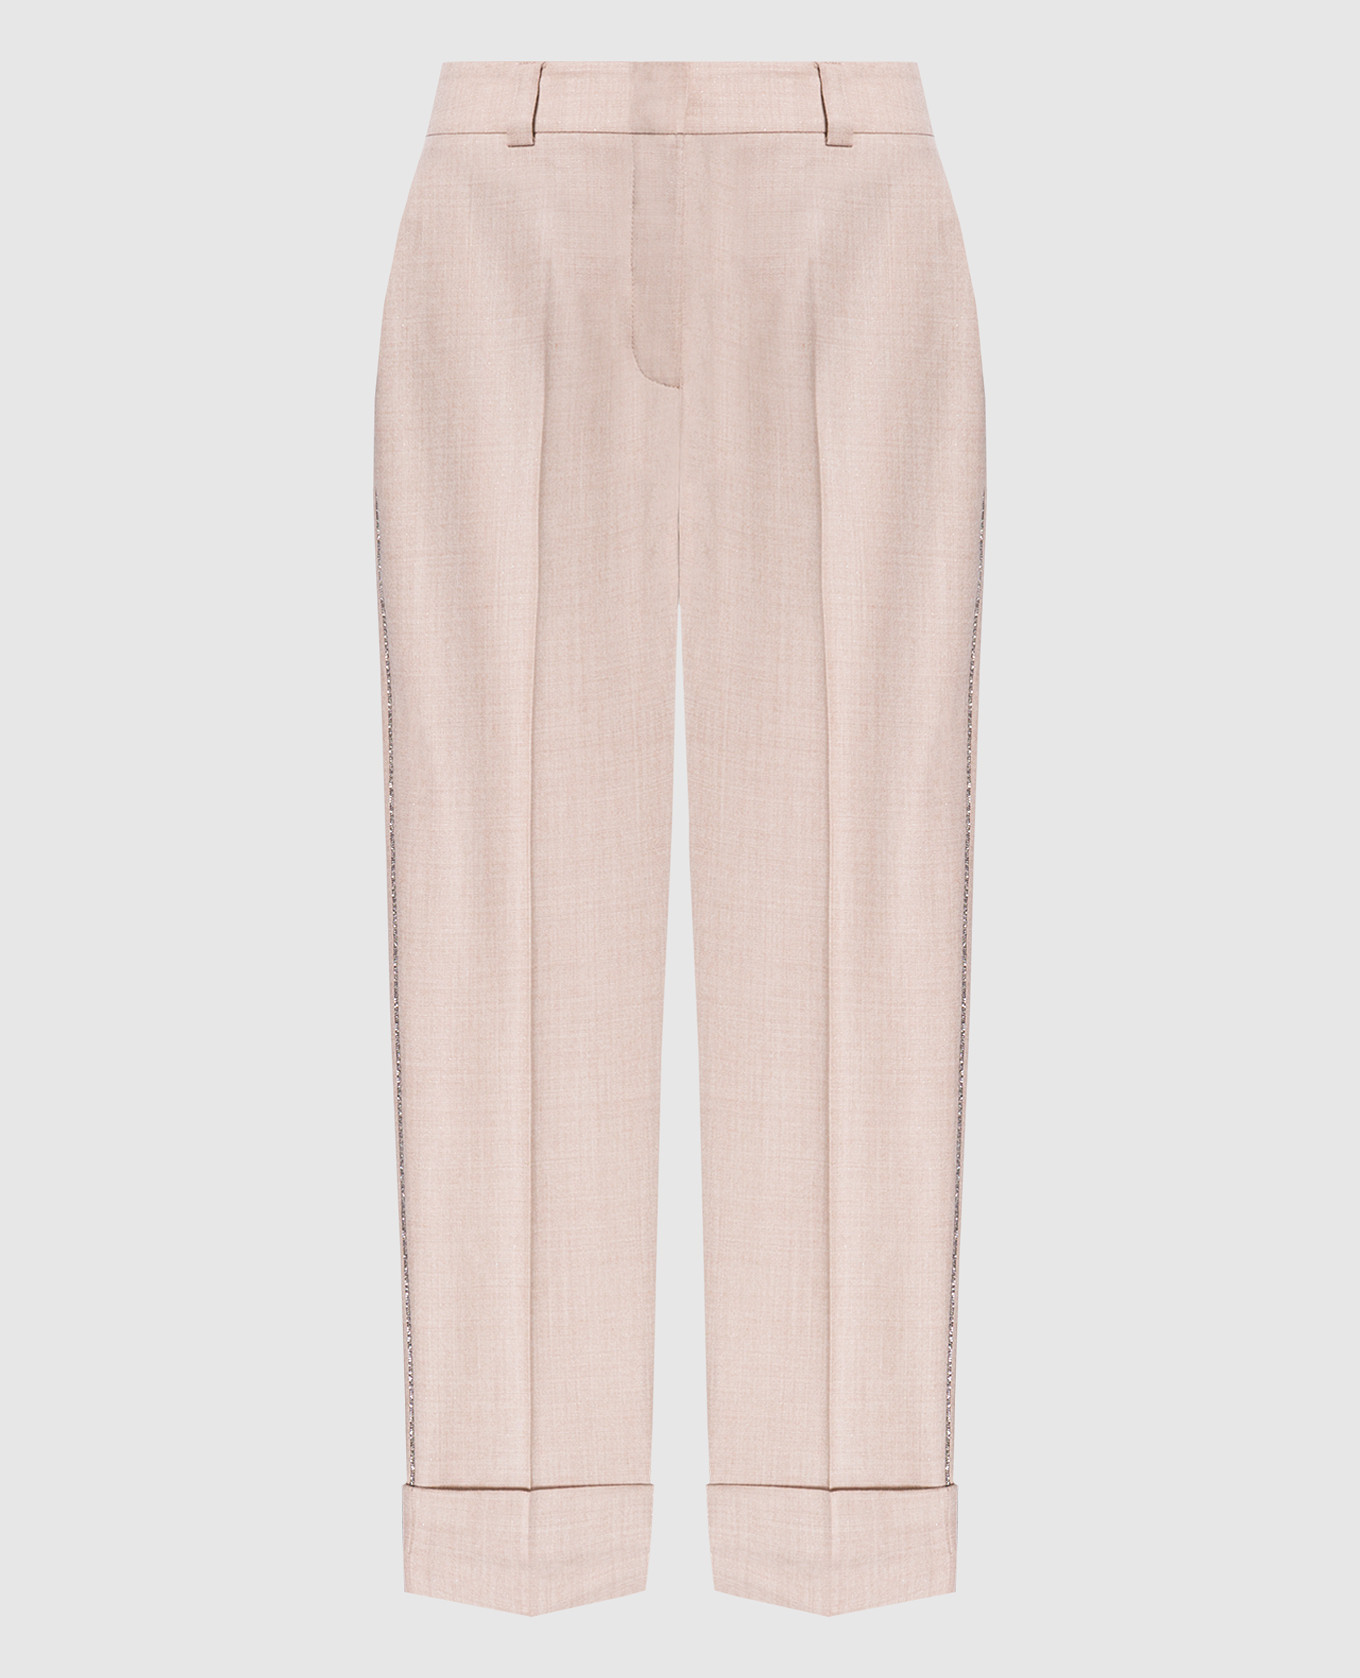 Beige wool trousers with a monil chain